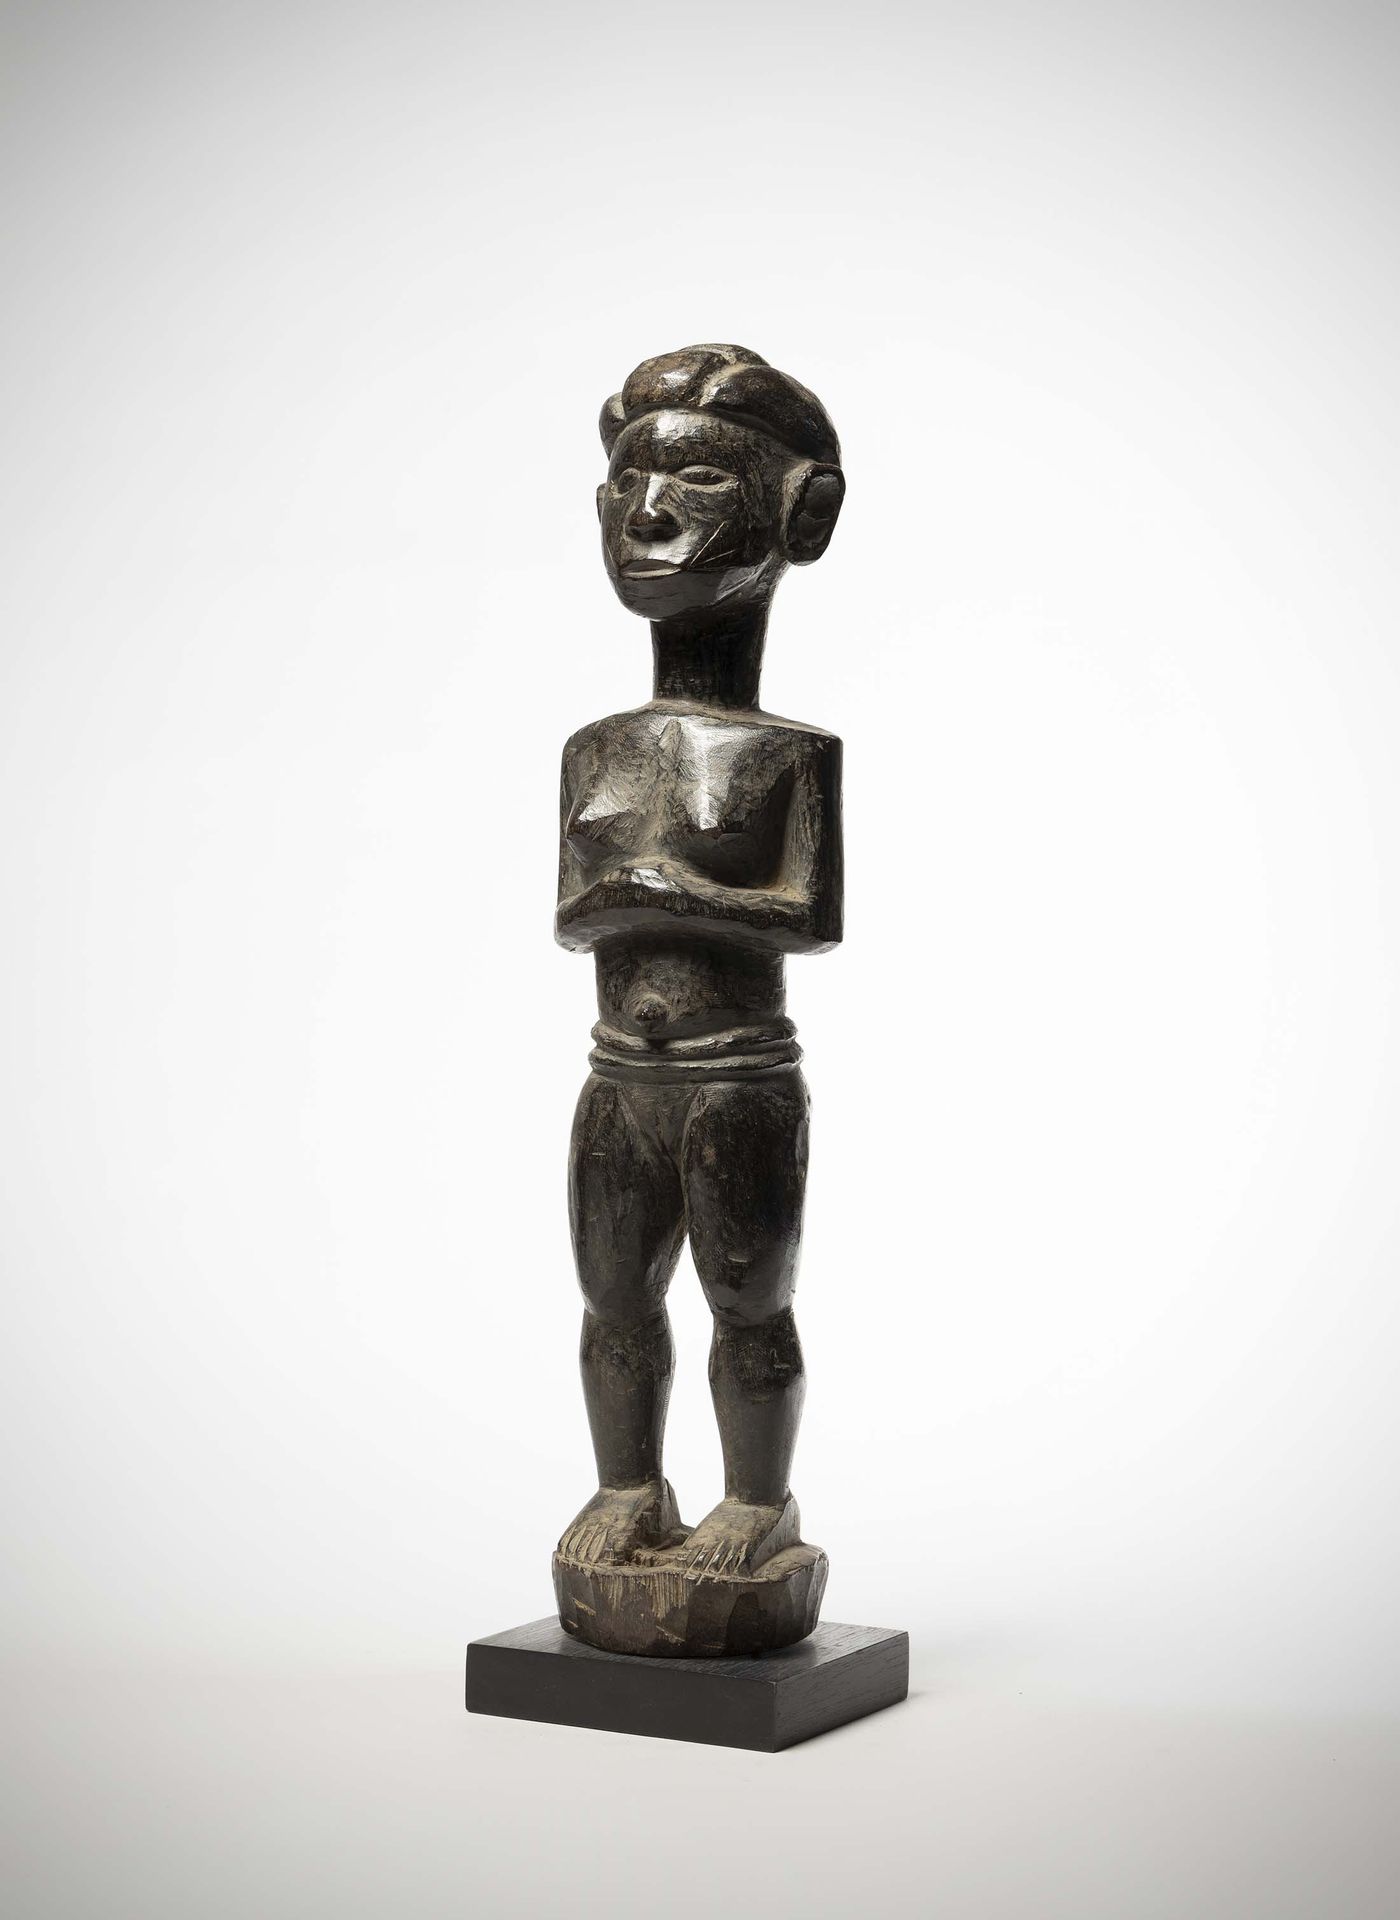 Null Tiv

(Nigeria) Female statue in heavy wood with a shiny black patina.

Thes&hellip;